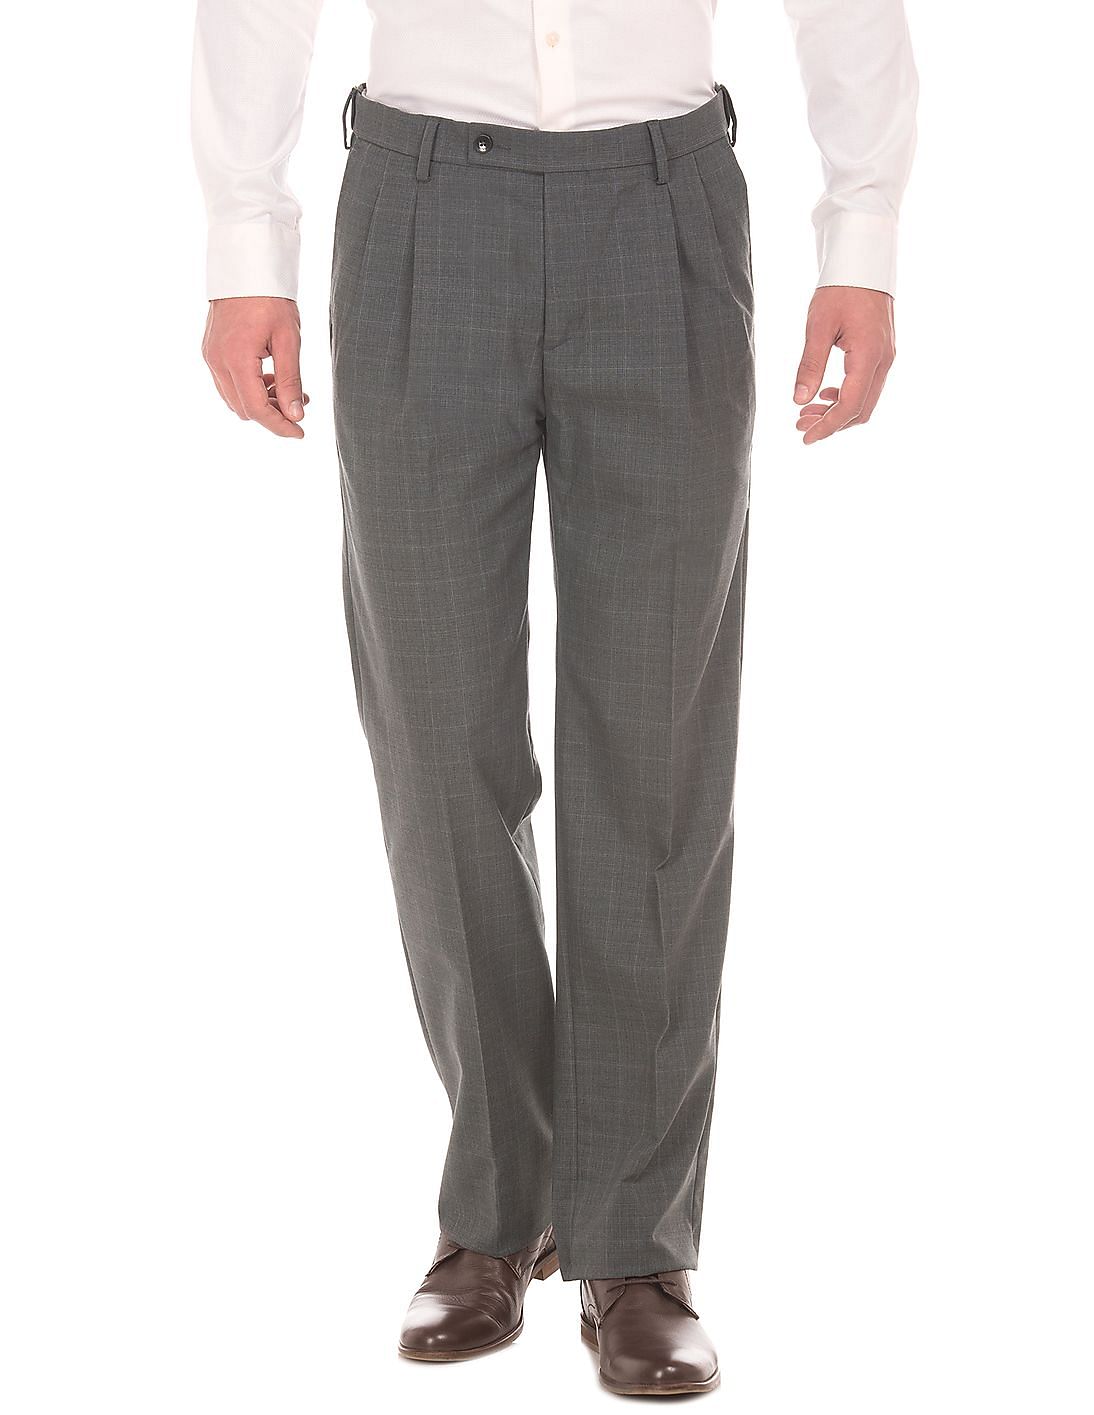 Buy Arrow Pleated Front Check Trousers - NNNOW.com